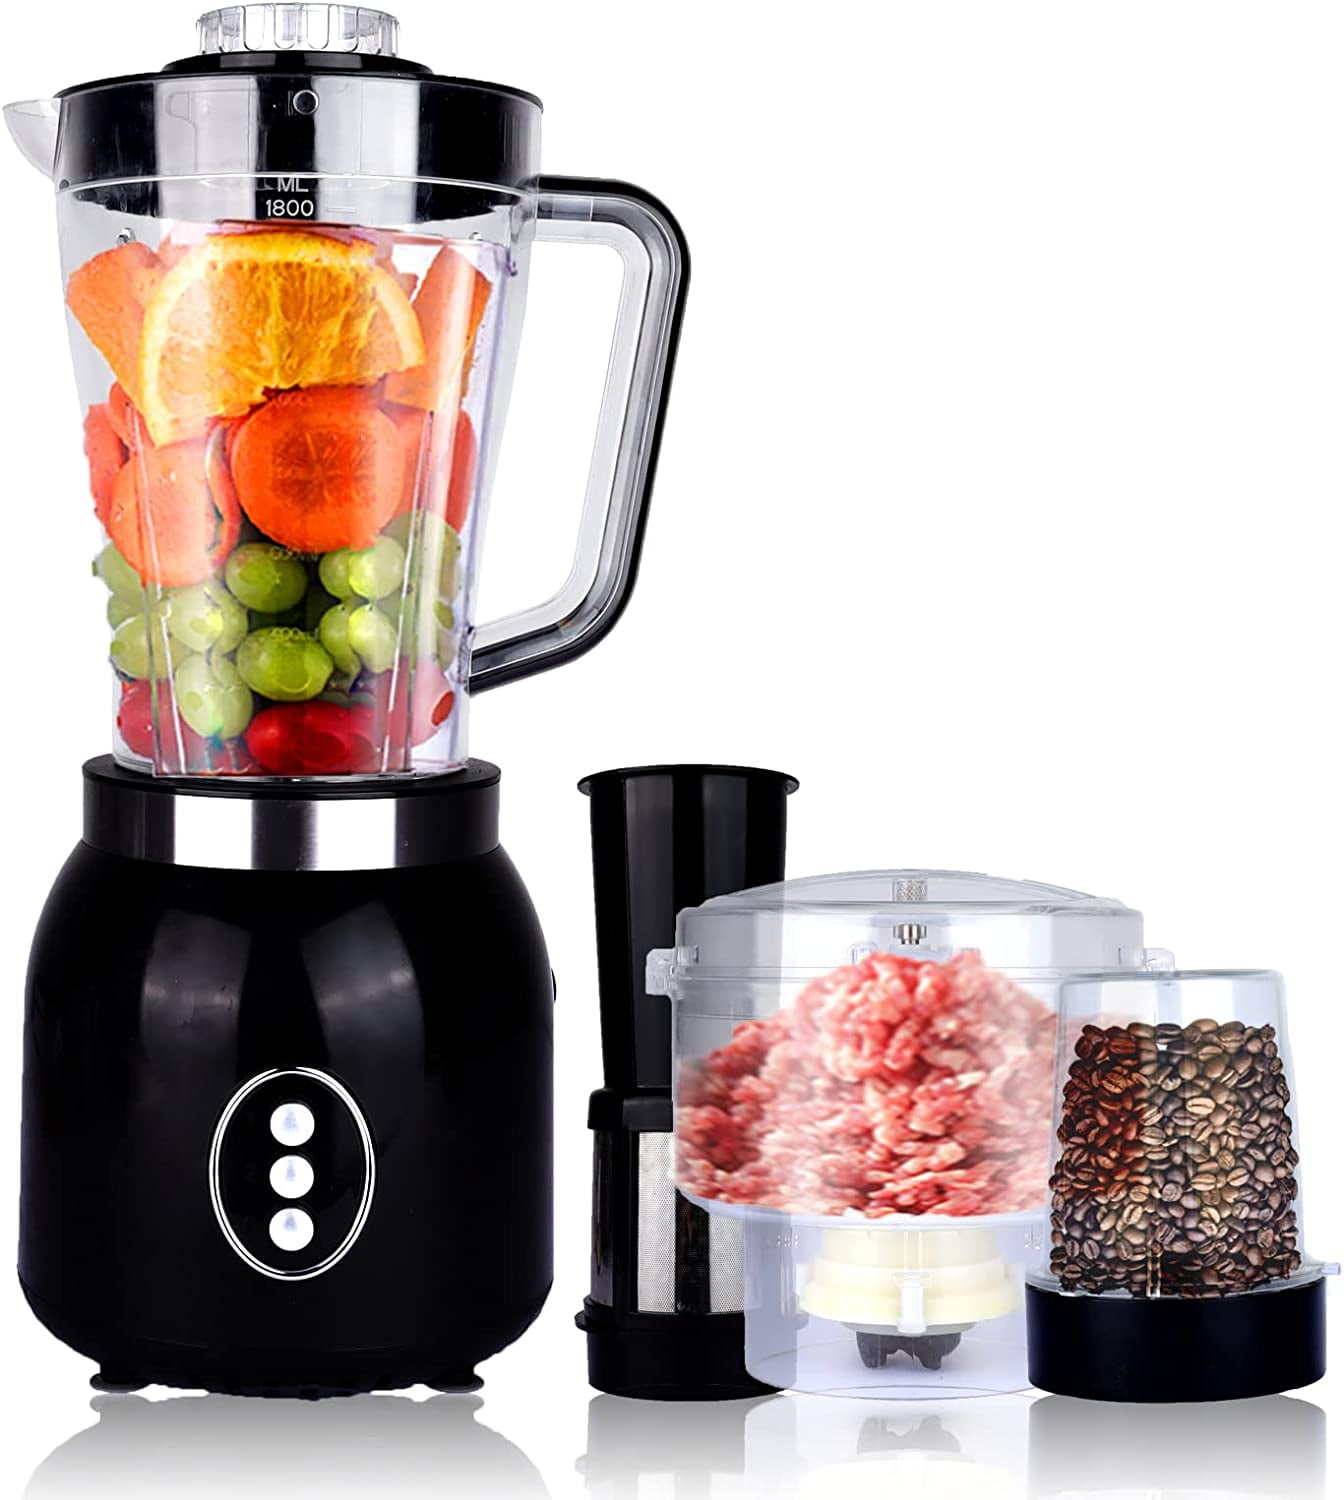 4 in 1 Food Processor Blender Combo for Kitchen, Multi-function Electric Countertop Blenders,Food Chopper for Meat, Vegetables, Fruits, Coffee,Beans 600W High Speed Coffee Grinder -